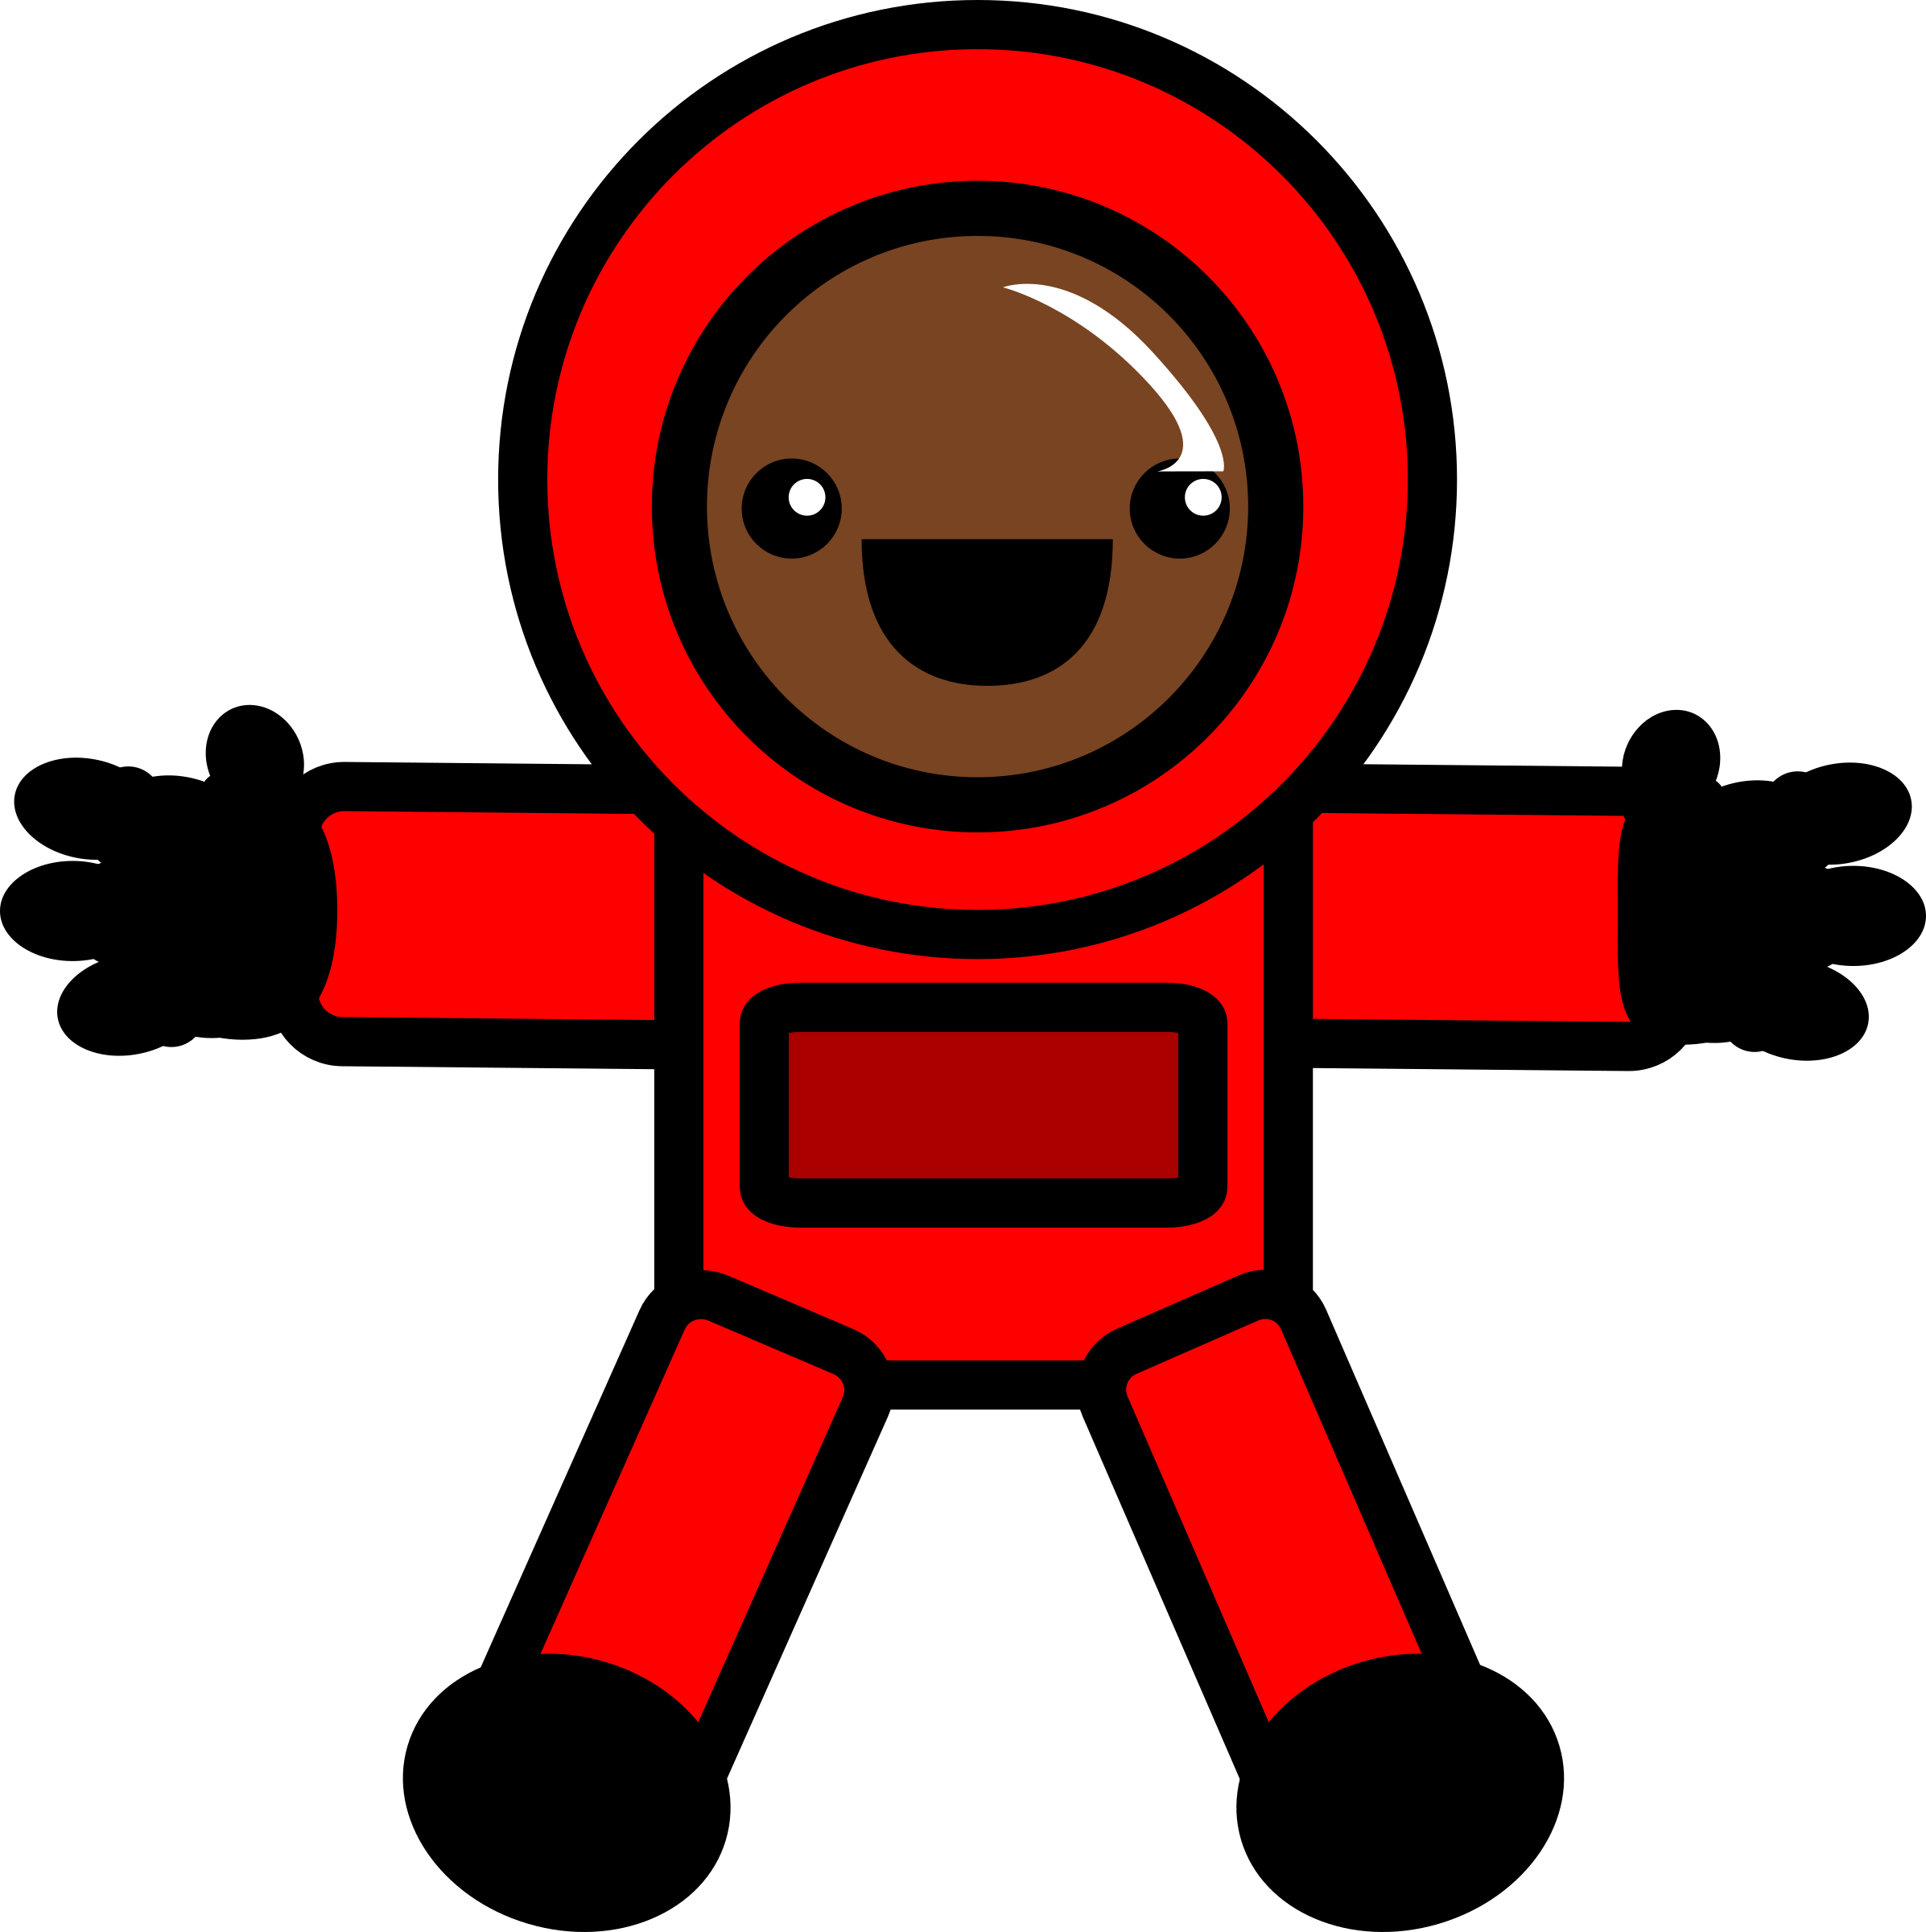 space travel clipart - photo #15